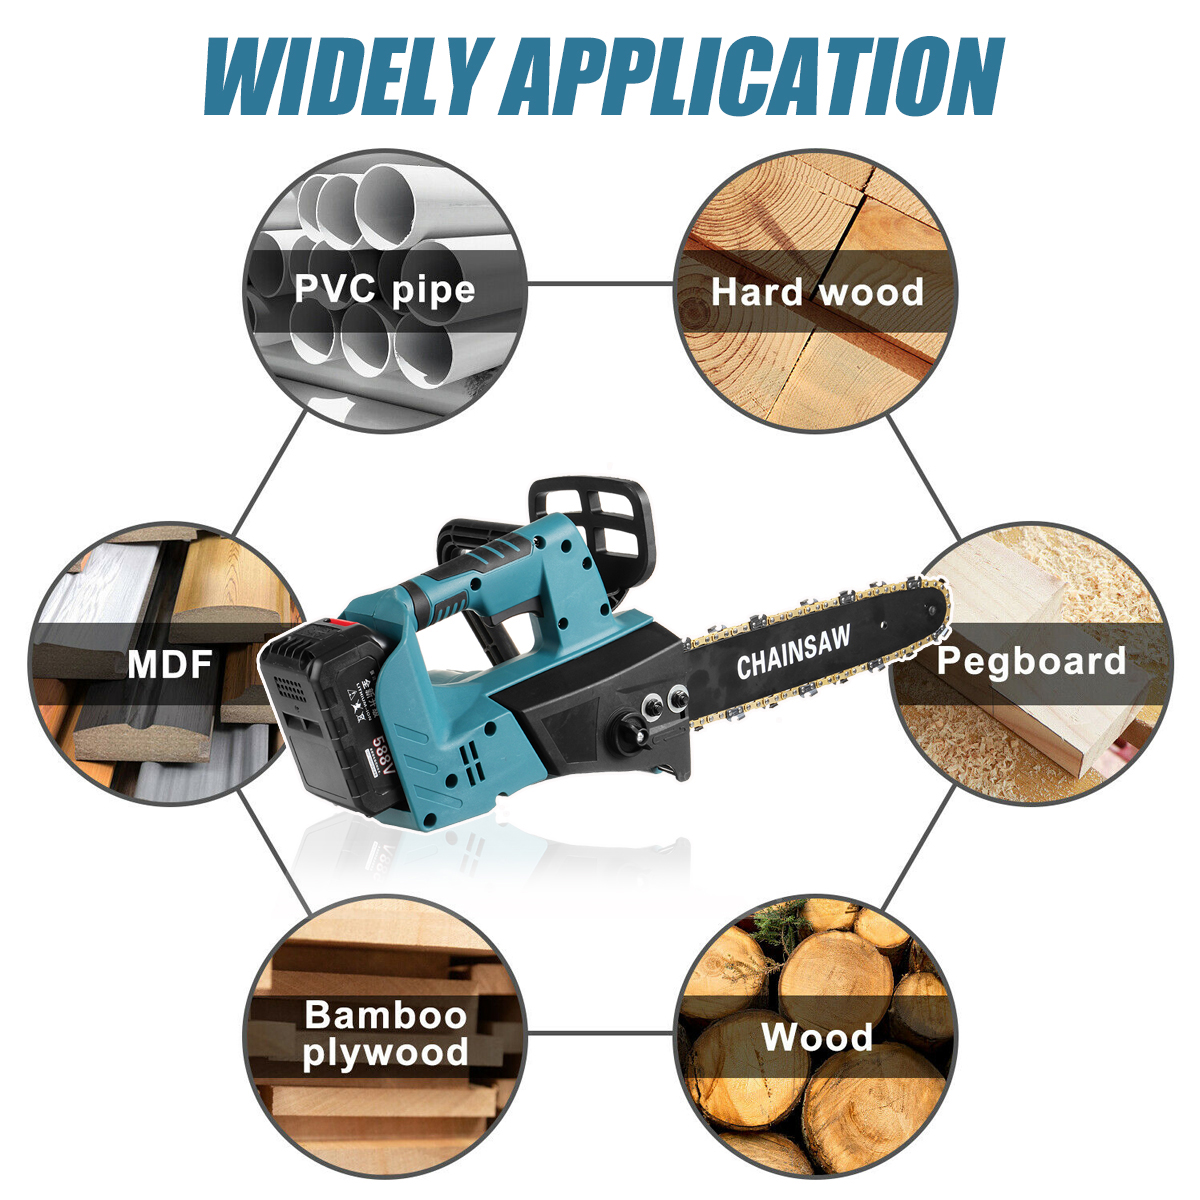 5ms-Portable-Electric-Brushless-Saw-Pruning-Chain-Saw-Rechargeable-Woodworking-Power-Tools-Wood-Cutt-1909228-11